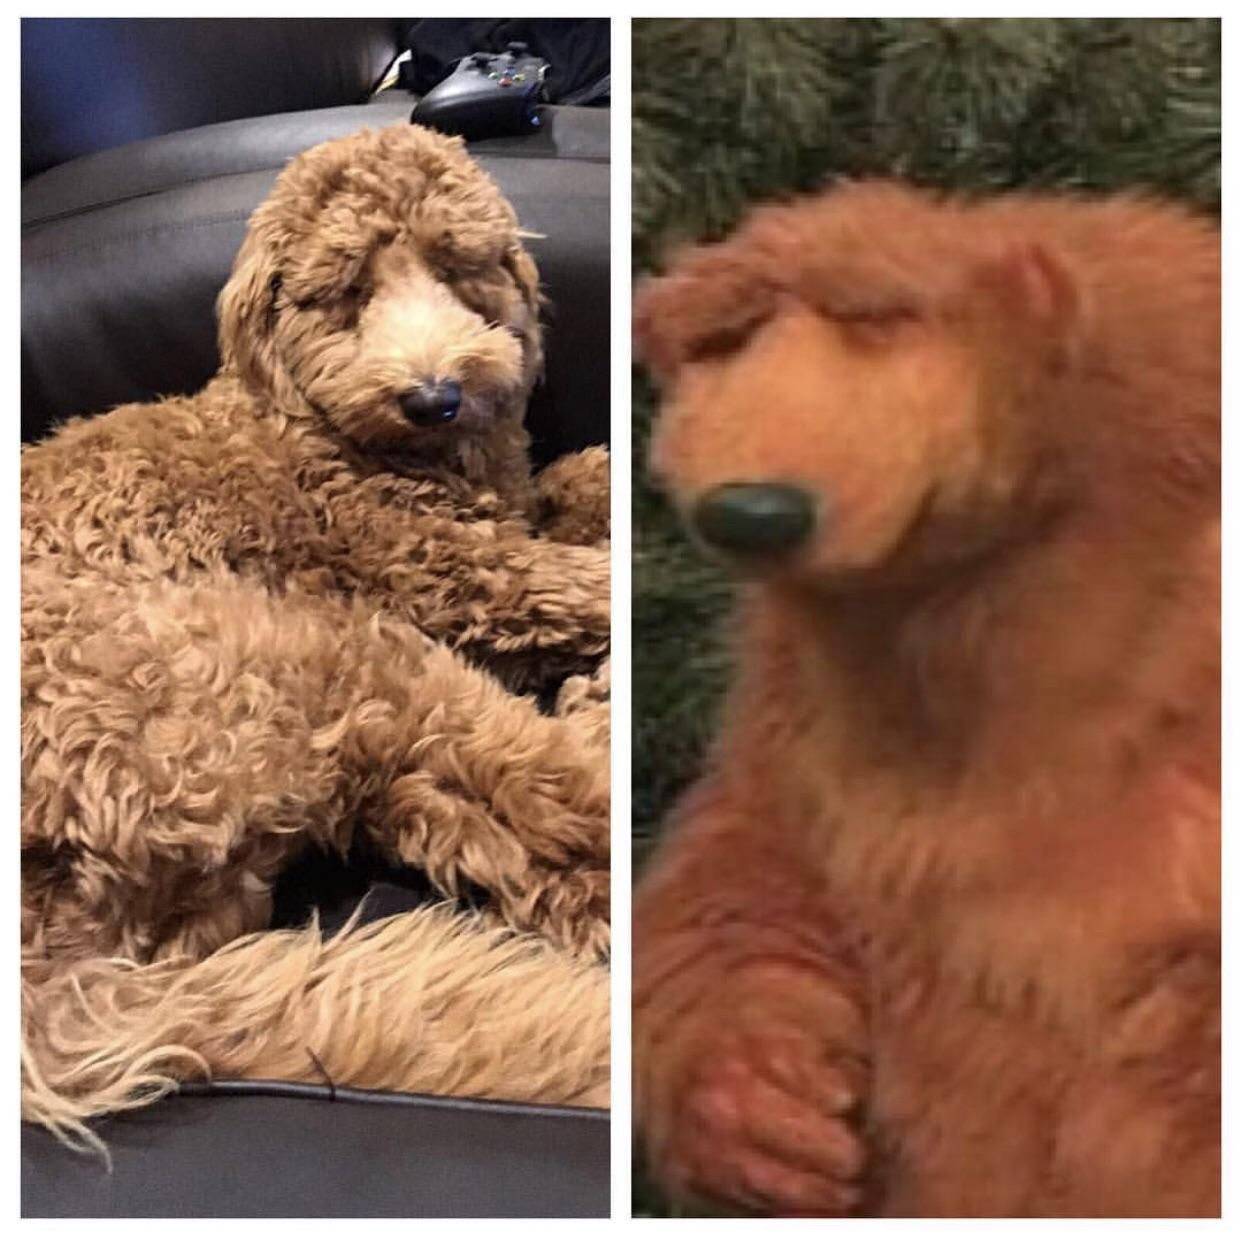 my friend pointed out that my dog looks like Bear in The Big Blue House and now I can’t unsee it